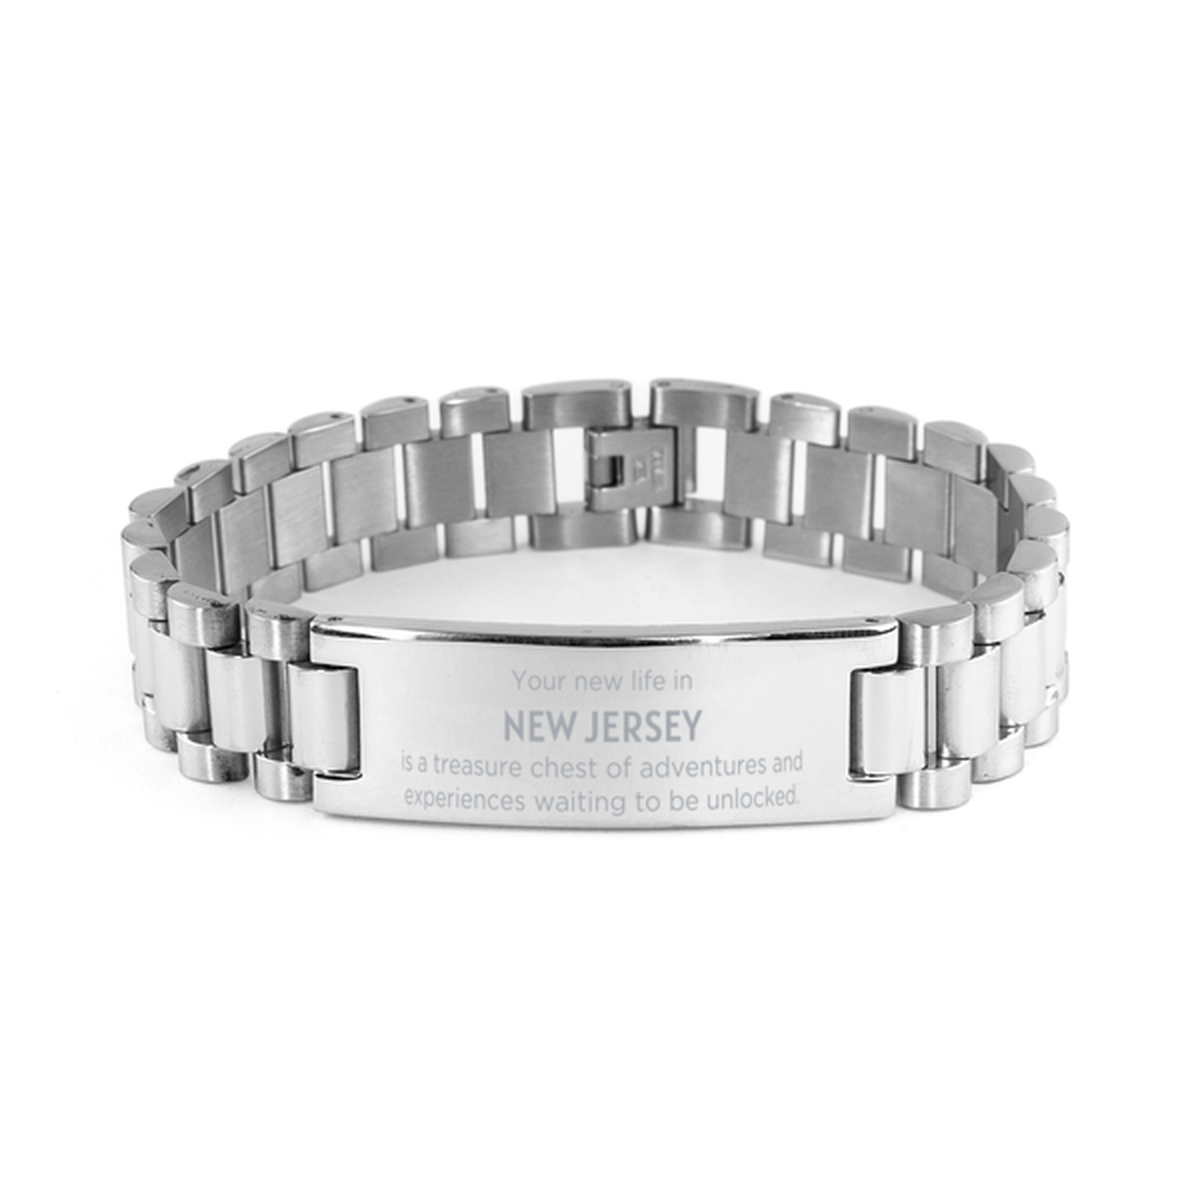 Moving to New Jersey Gifts, Your new life in New Jersey, Long Distance New Jersey Christmas Ladder Stainless Steel Bracelet For Men, Women, Friends, Coworkers